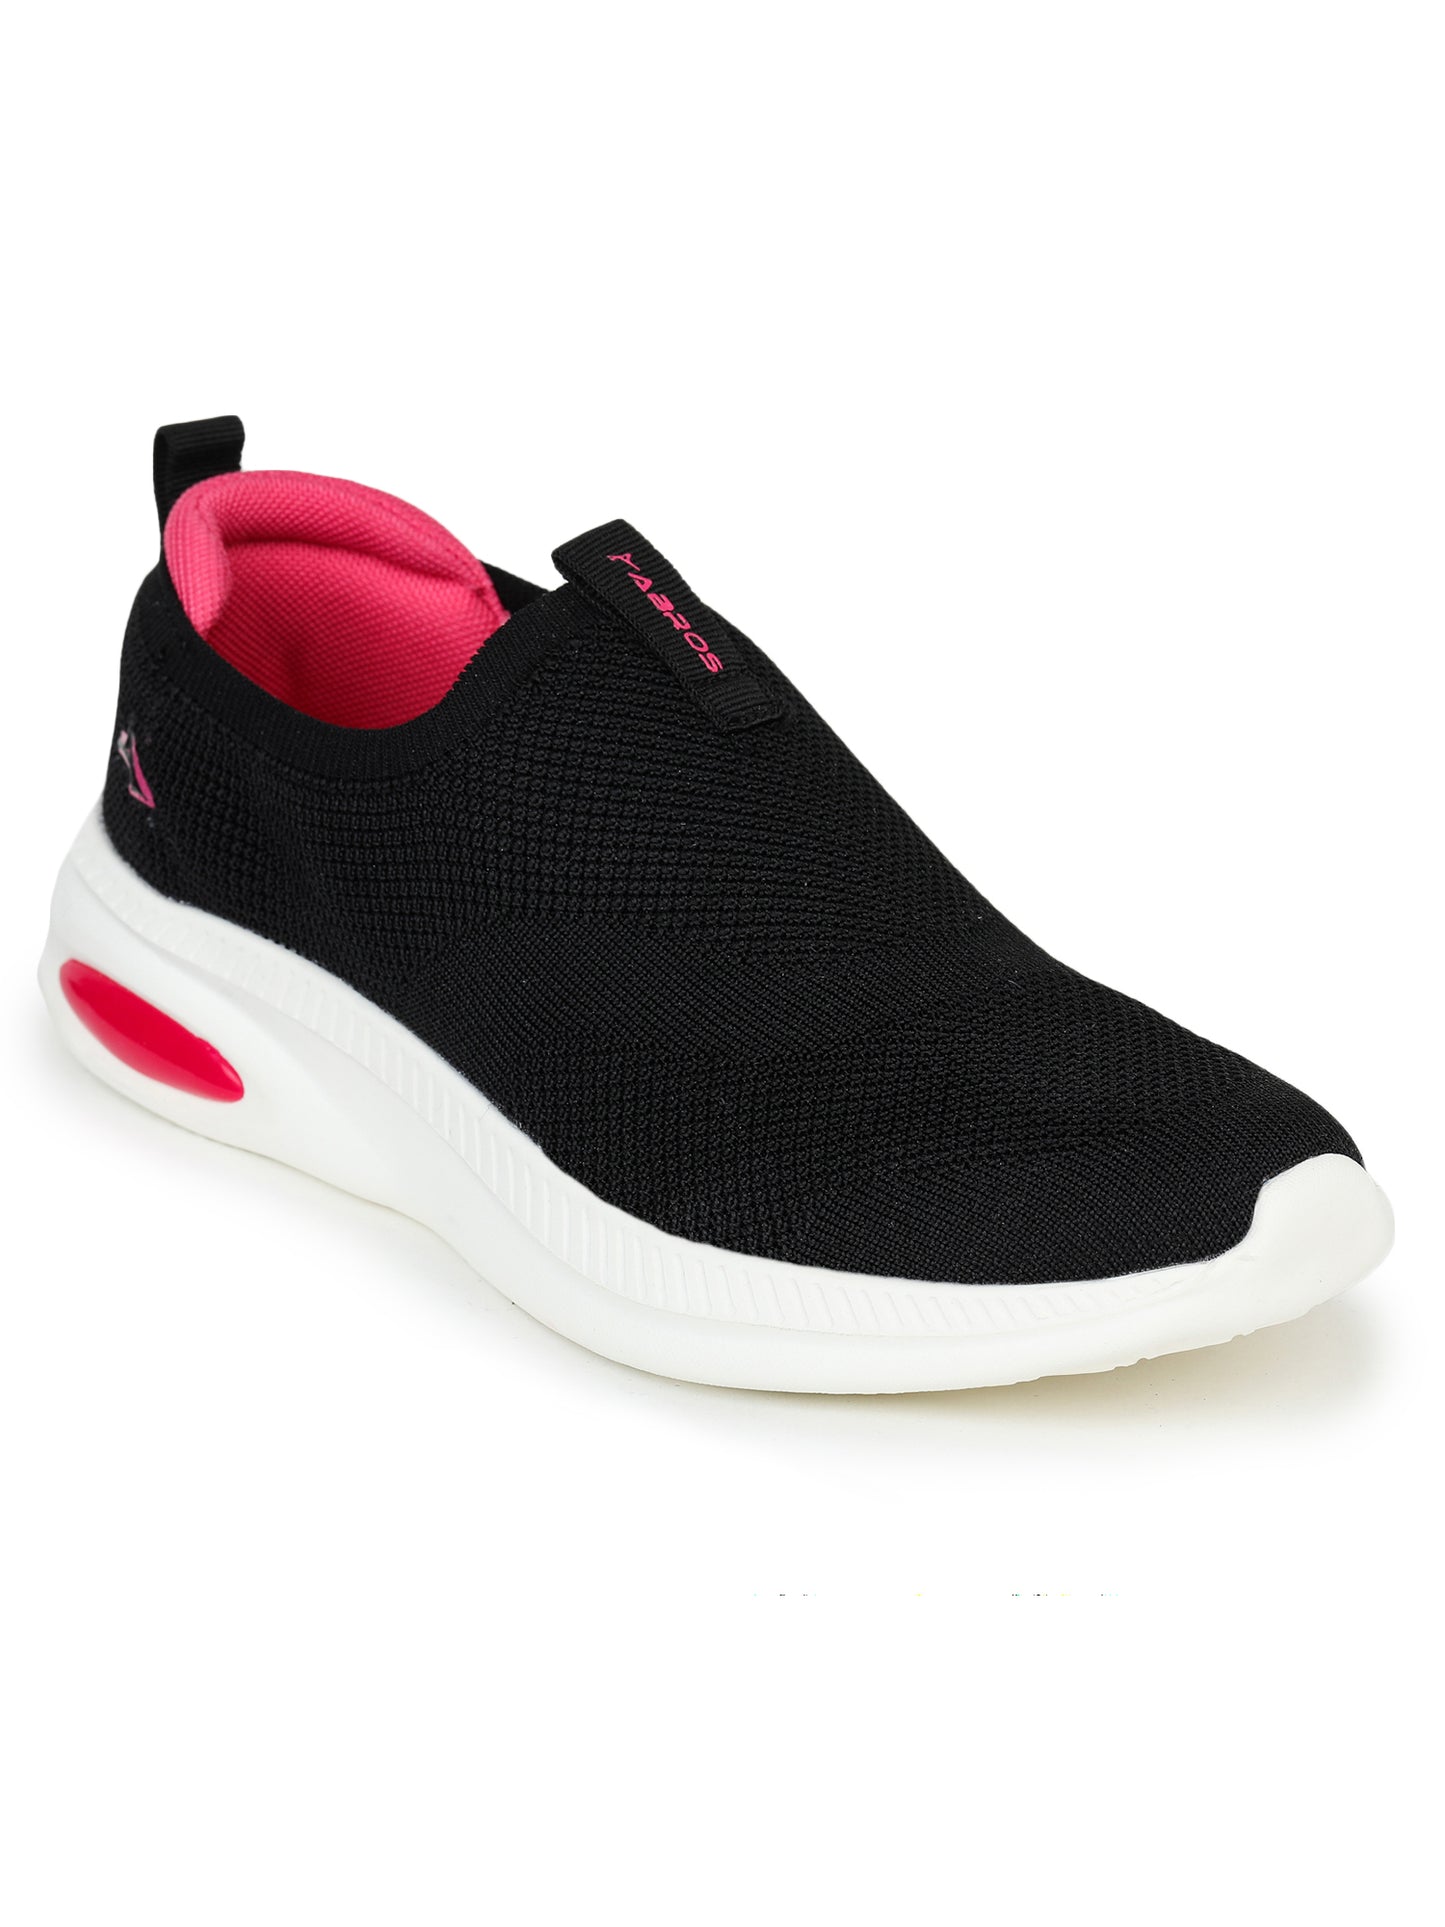 ABROS PERRY SPORTS SHOES FOR WOMEN